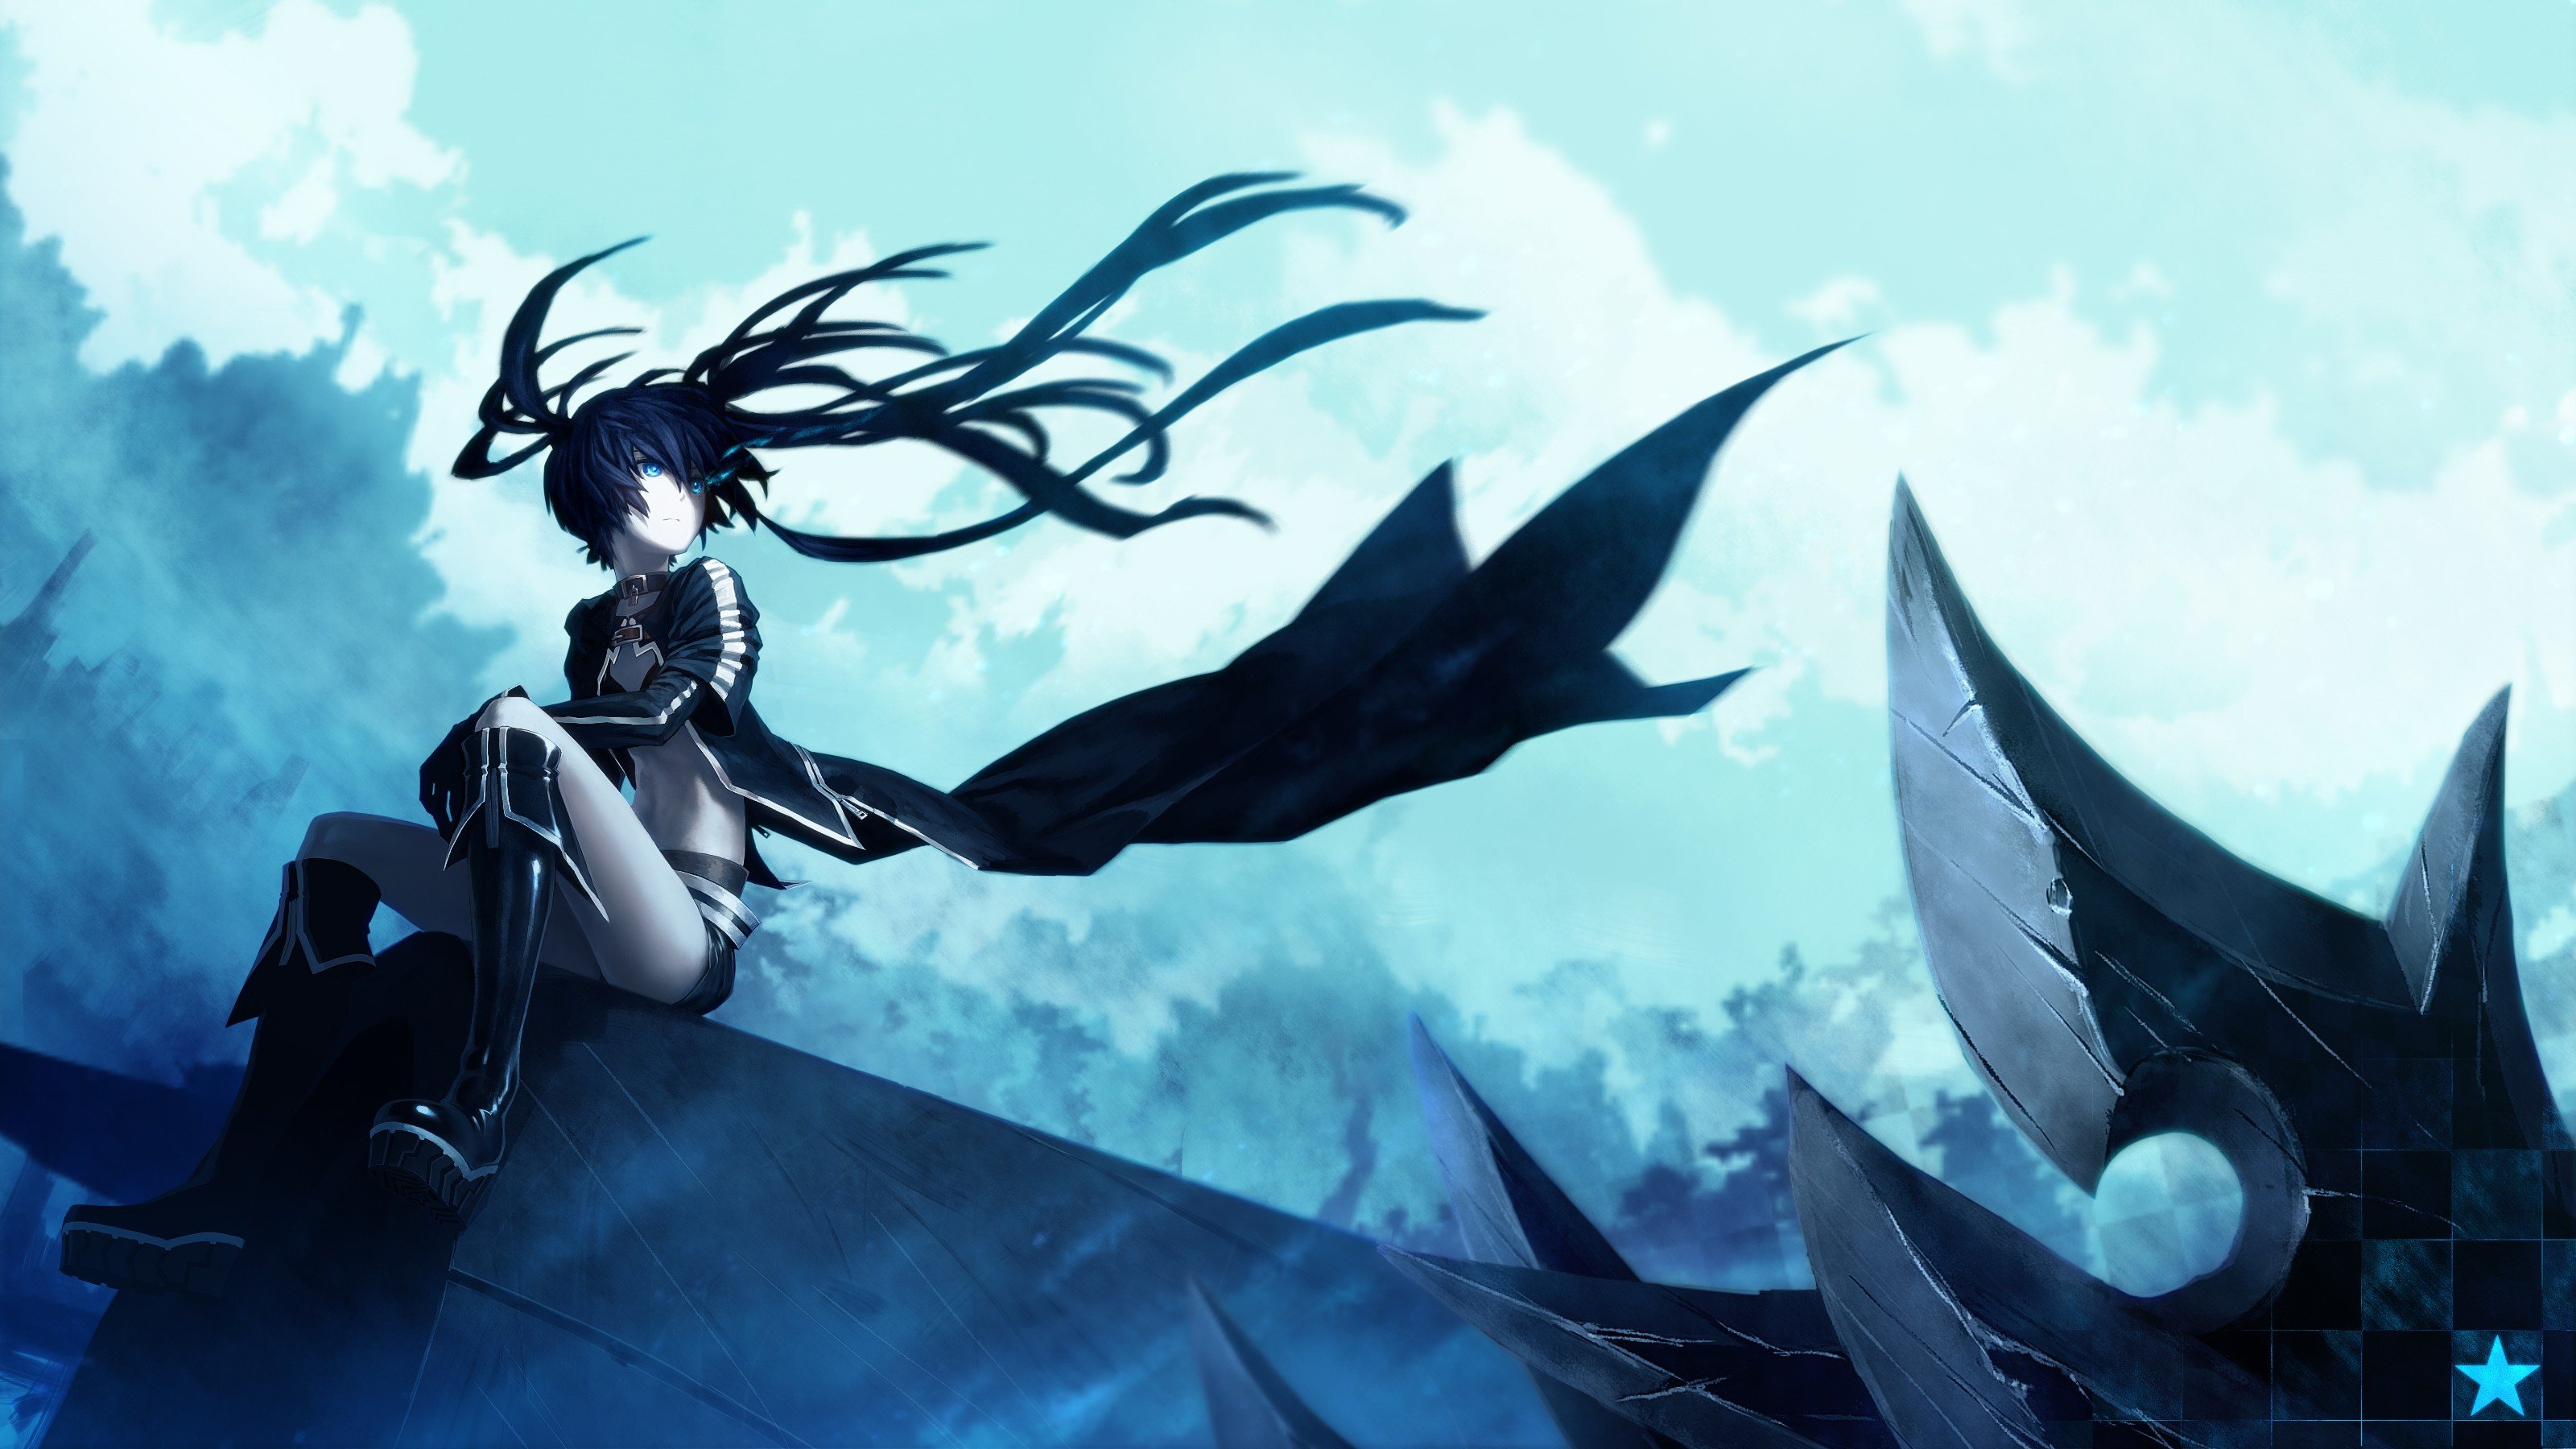 Black Rock Shooter, Fiery eyes, Sitting, Long hair, Twintails, Boots, Wind, Sky, Clouds, Anime girls, Anime, Kuroi Mato Wallpaper